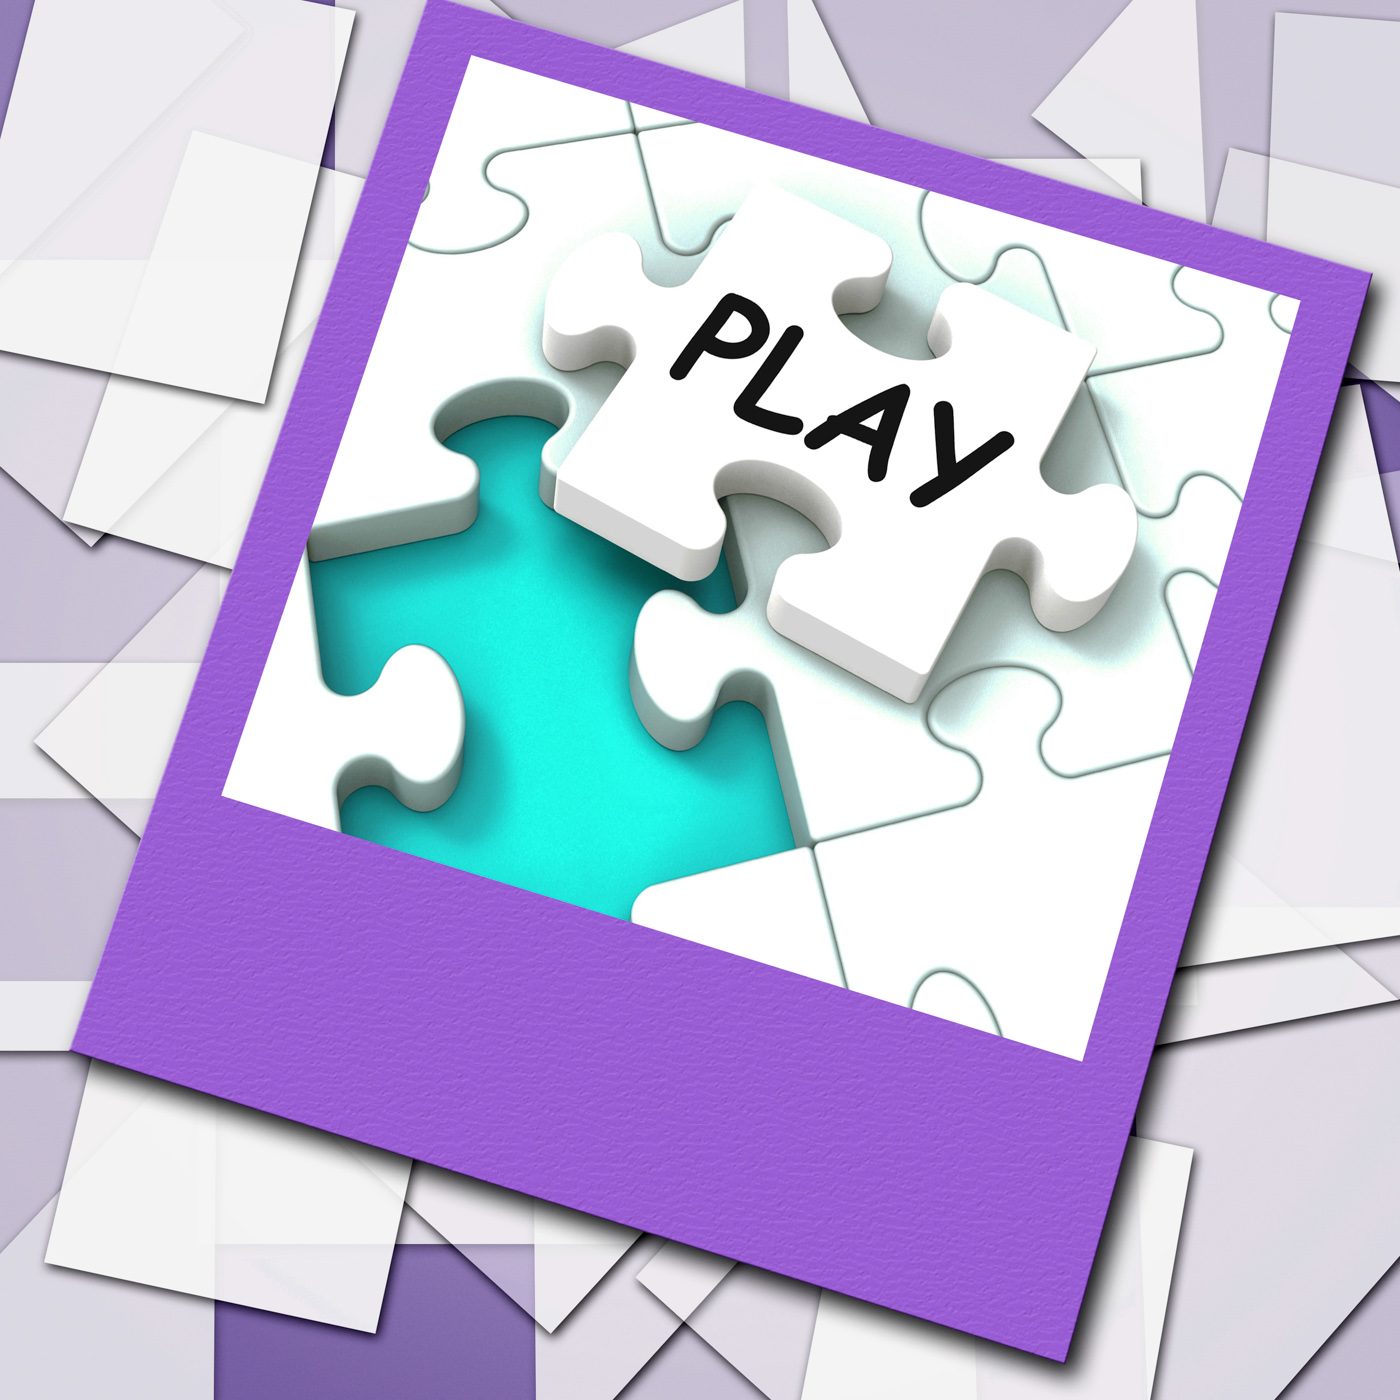 Play photo shows recreation and games on internet